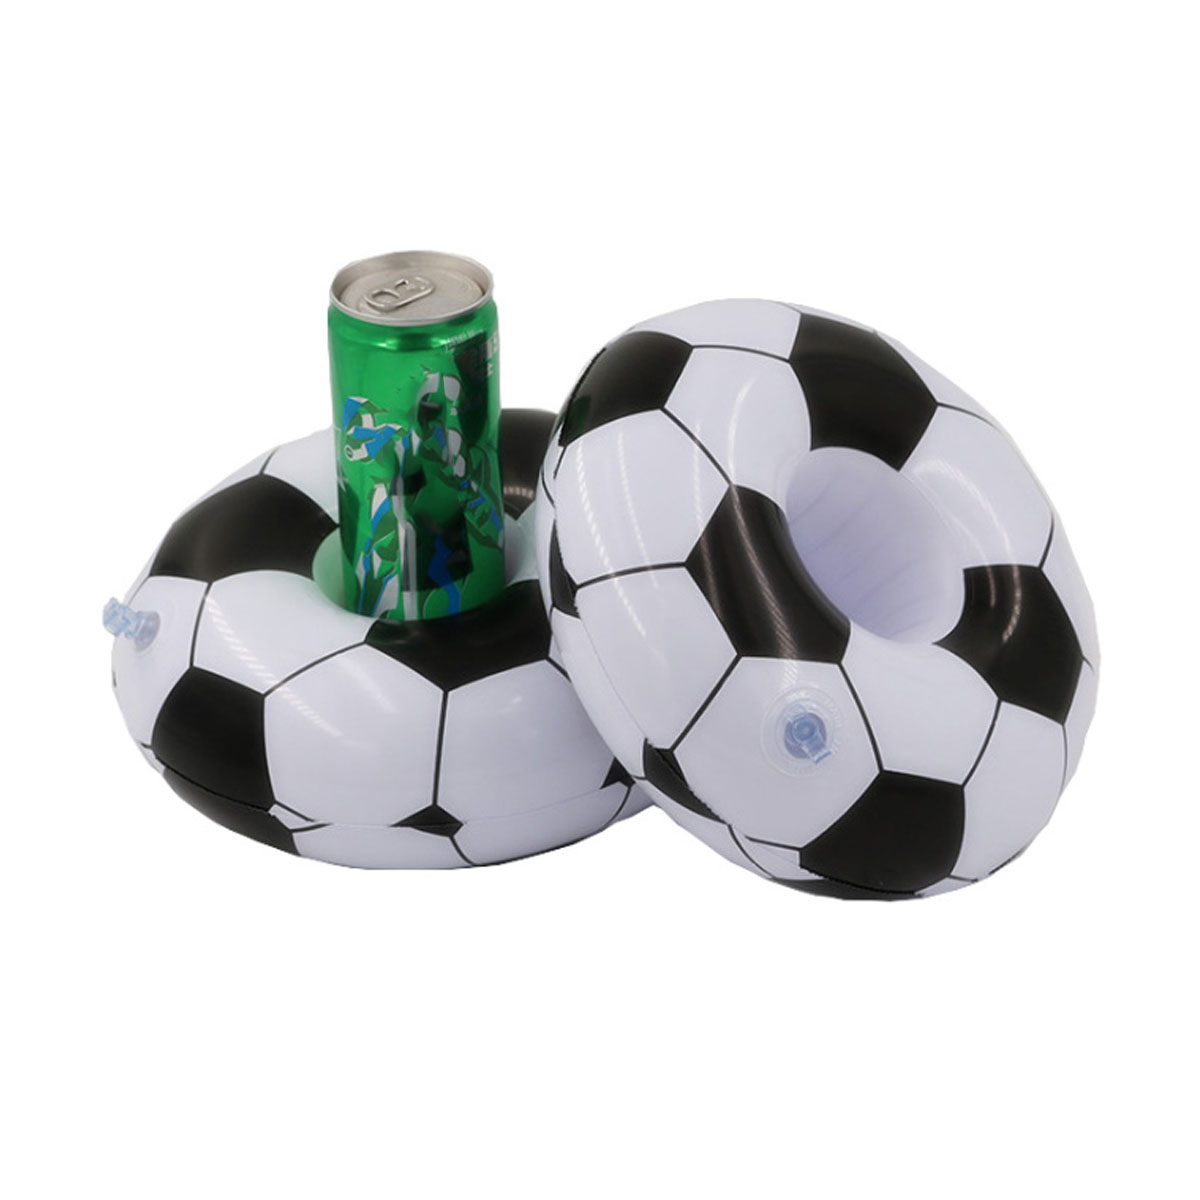 GL-AKL0123 Soccer Inflatable Floating Water Cup Holder